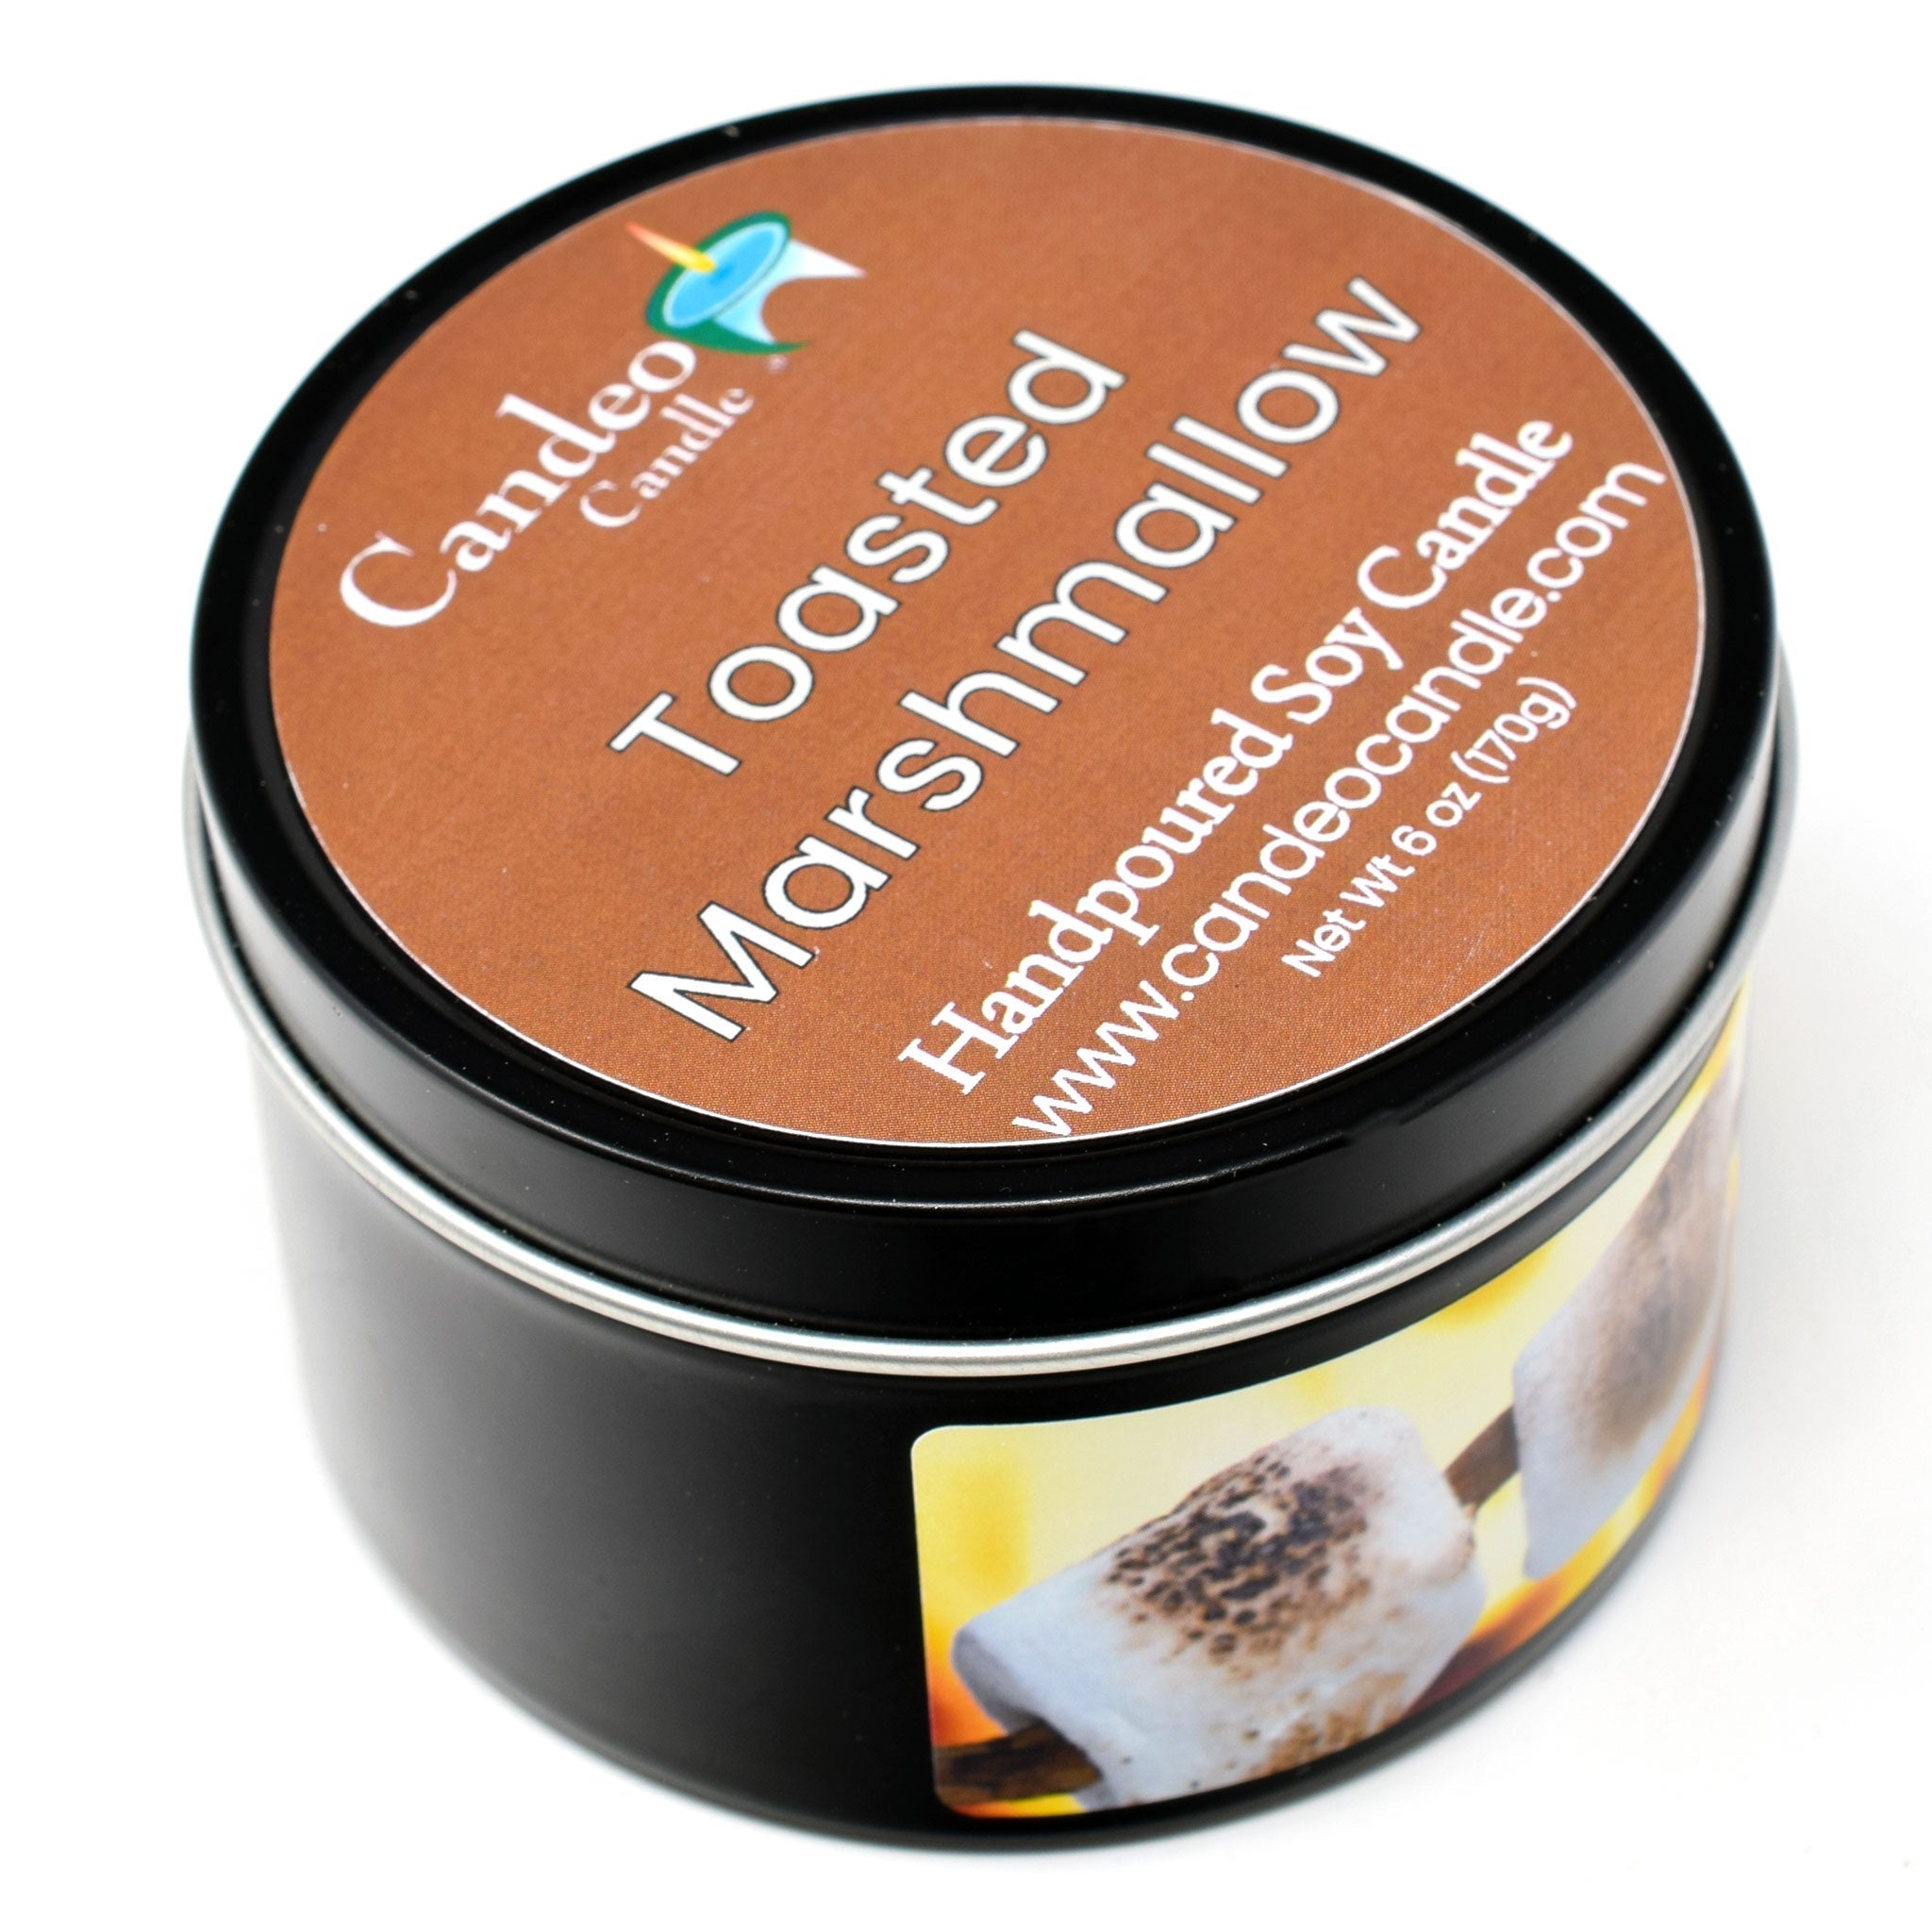 Toasted Marshmallow, 6oz Soy Candle Tin - Candeo Candle